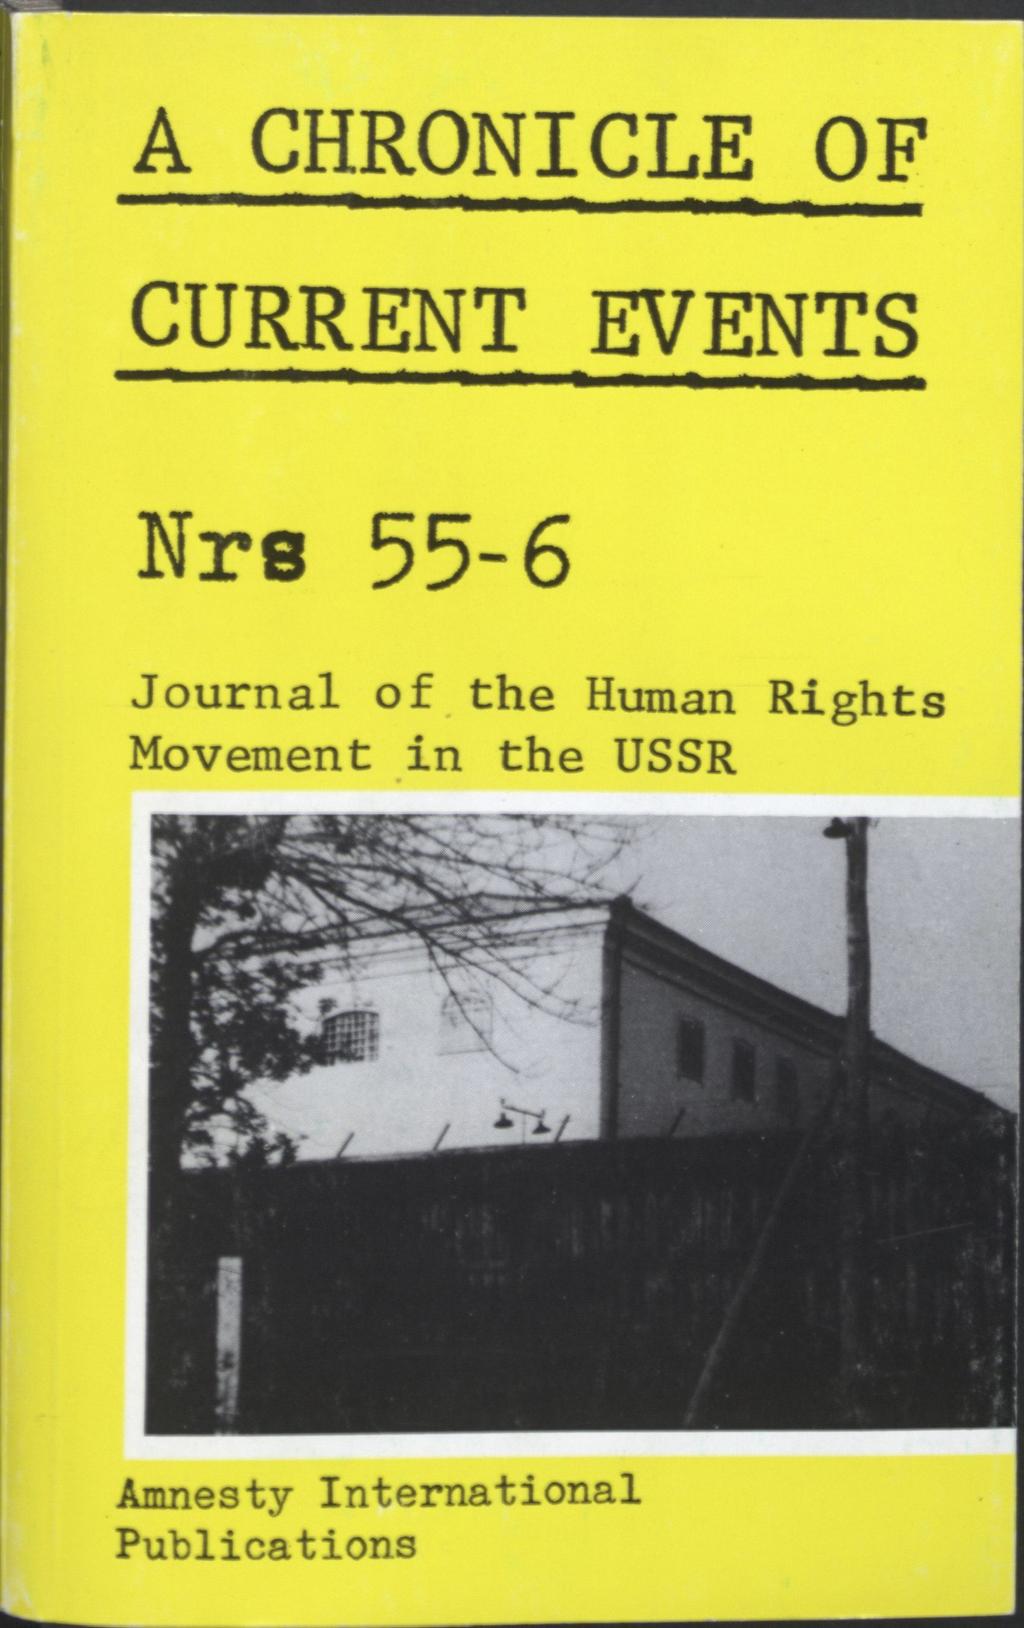 A CHRONICLE OF CURRENT EVENTS Nre 55-6 Journal of the Human